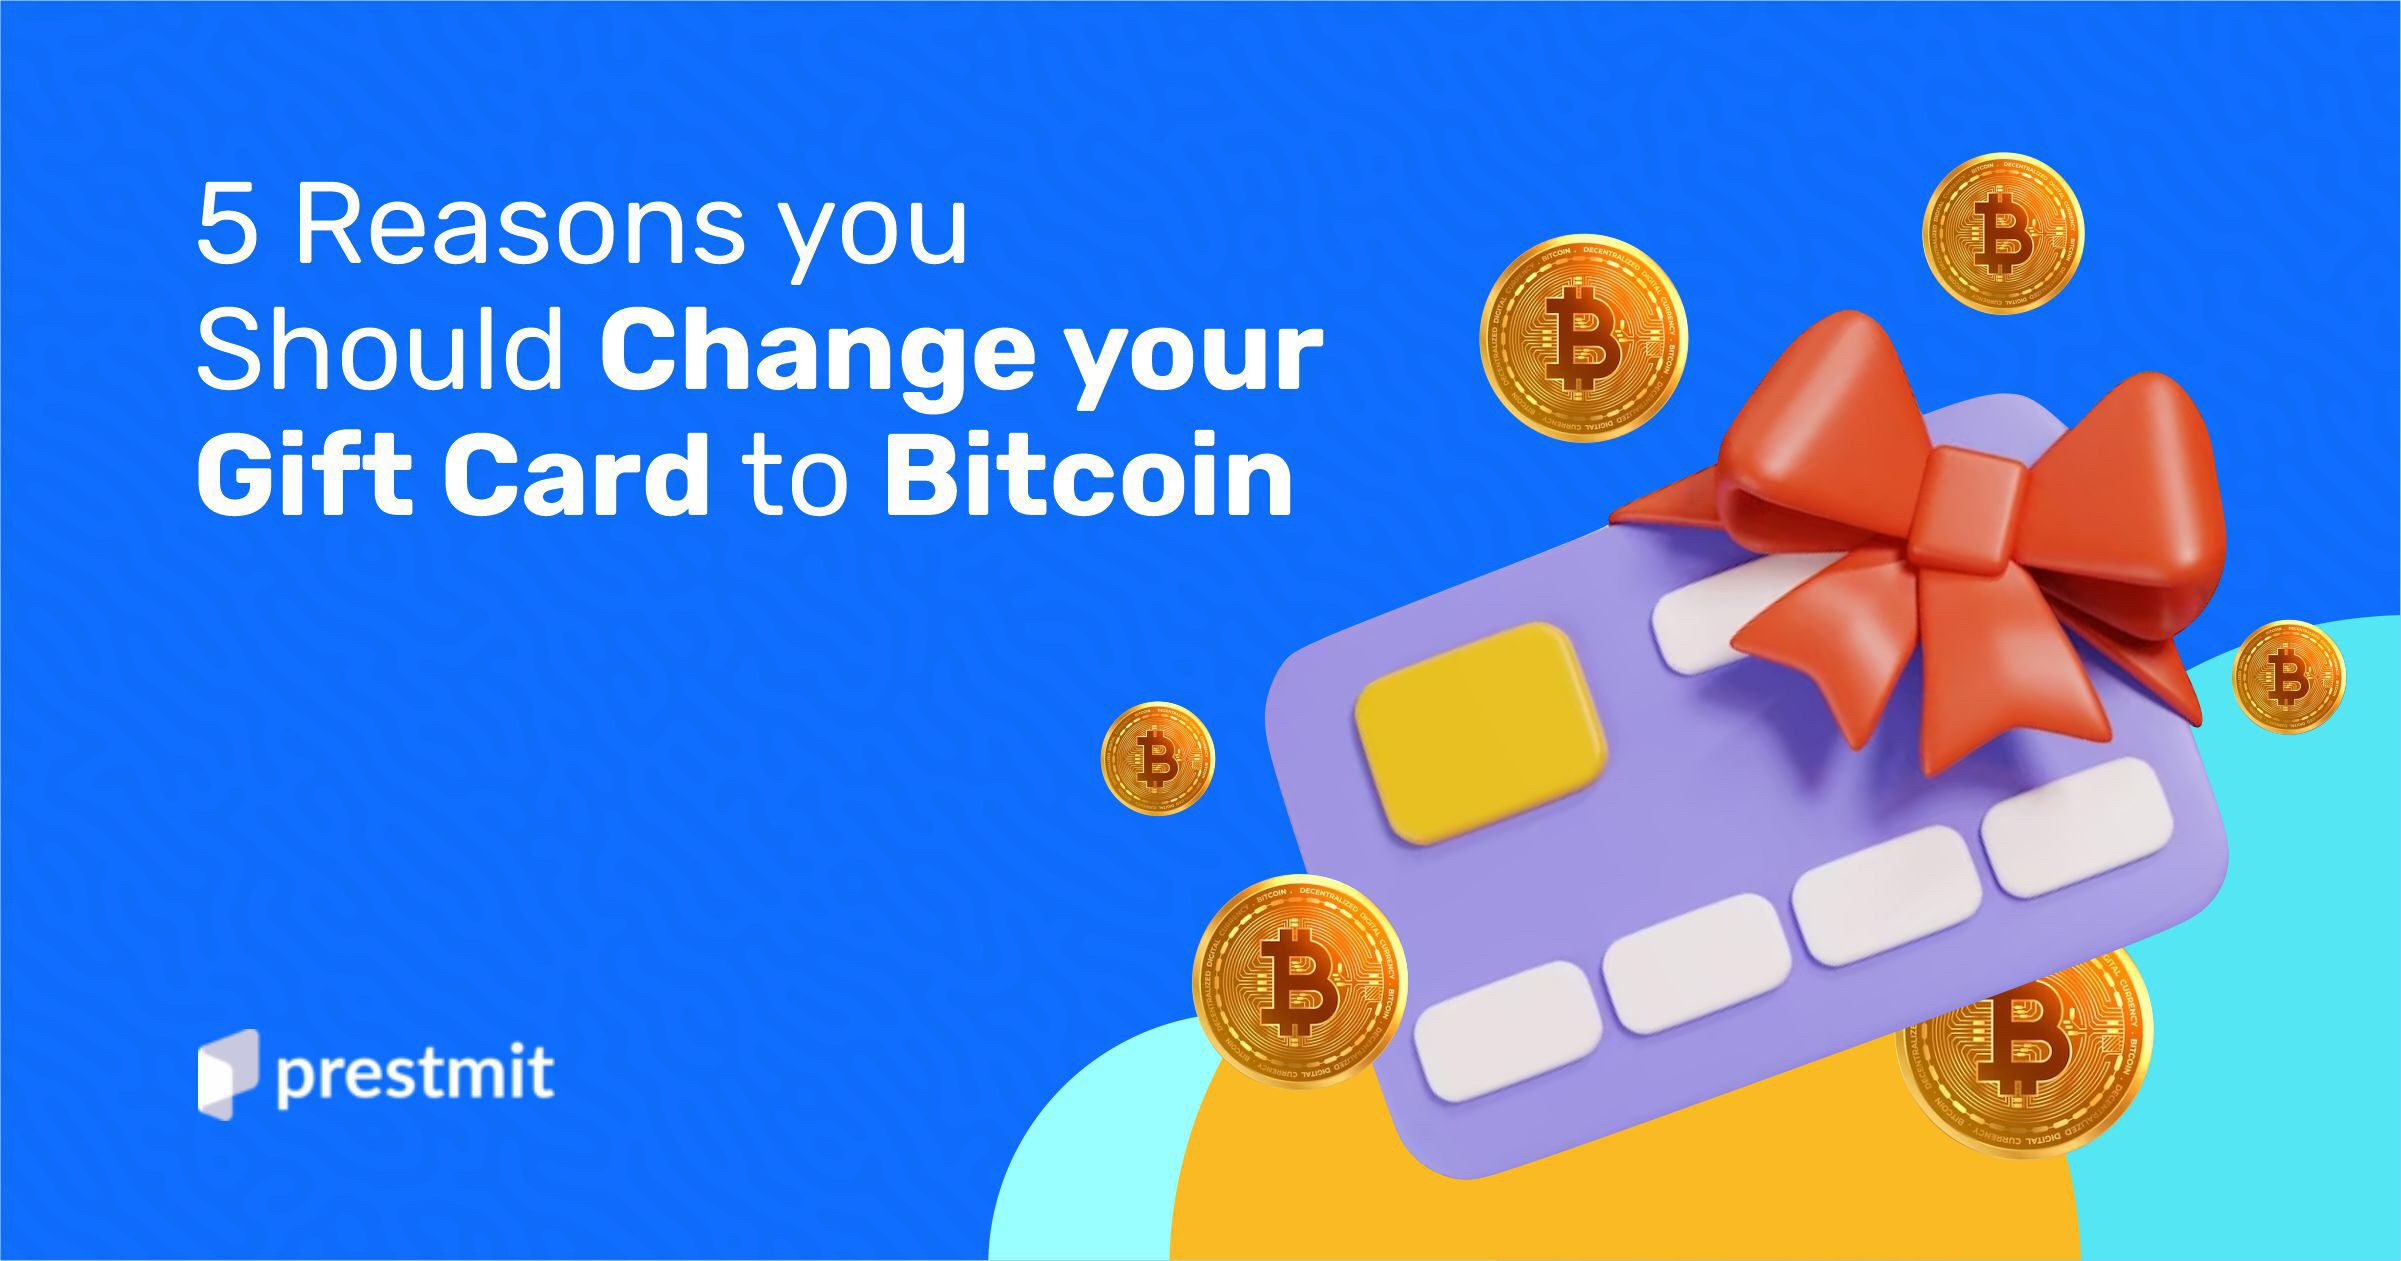 Our platform offers seamless exchanges for crypto and gift cards